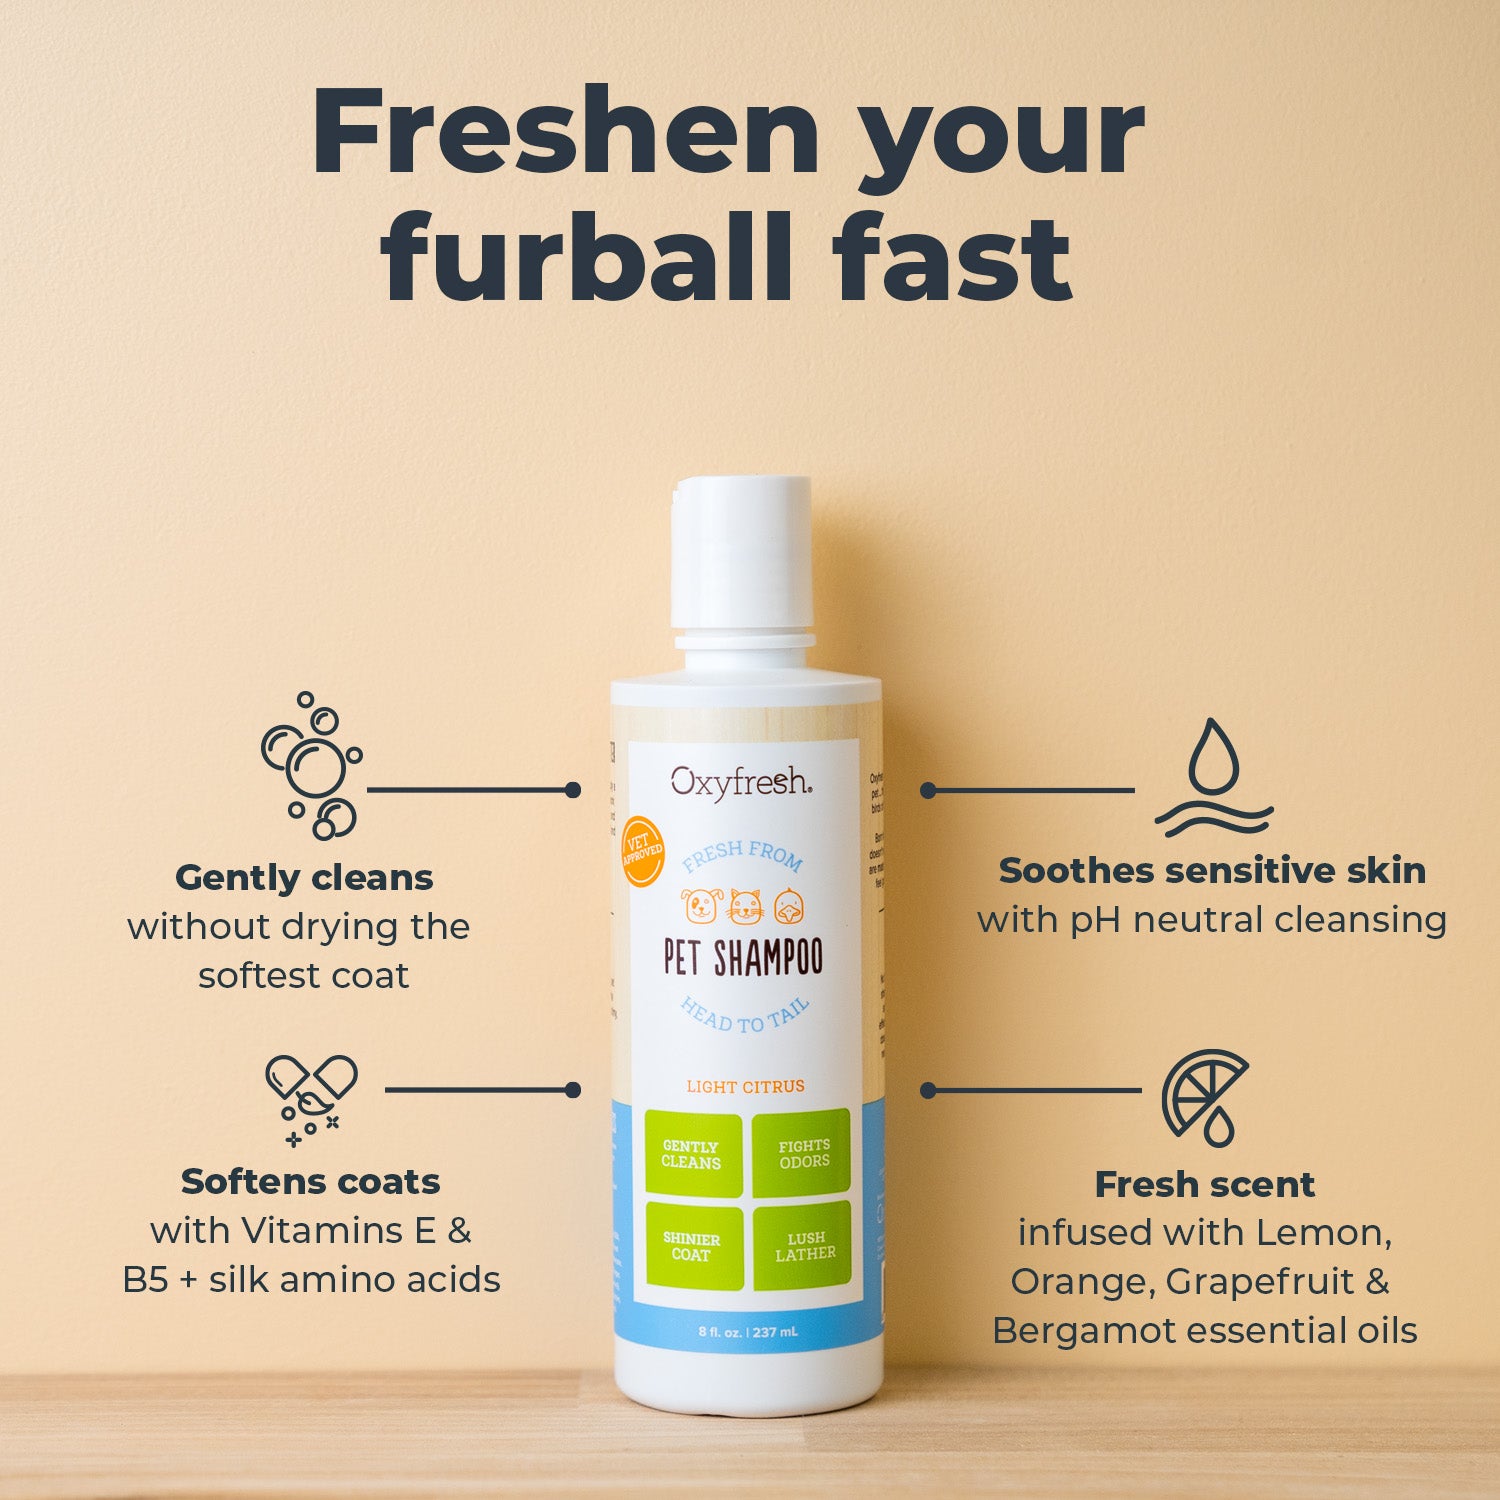 oxyfresh-pet-shampoo-gently-cleans-softens-coats-soothes-sensitive-skin-and-has-a-fresh-scent